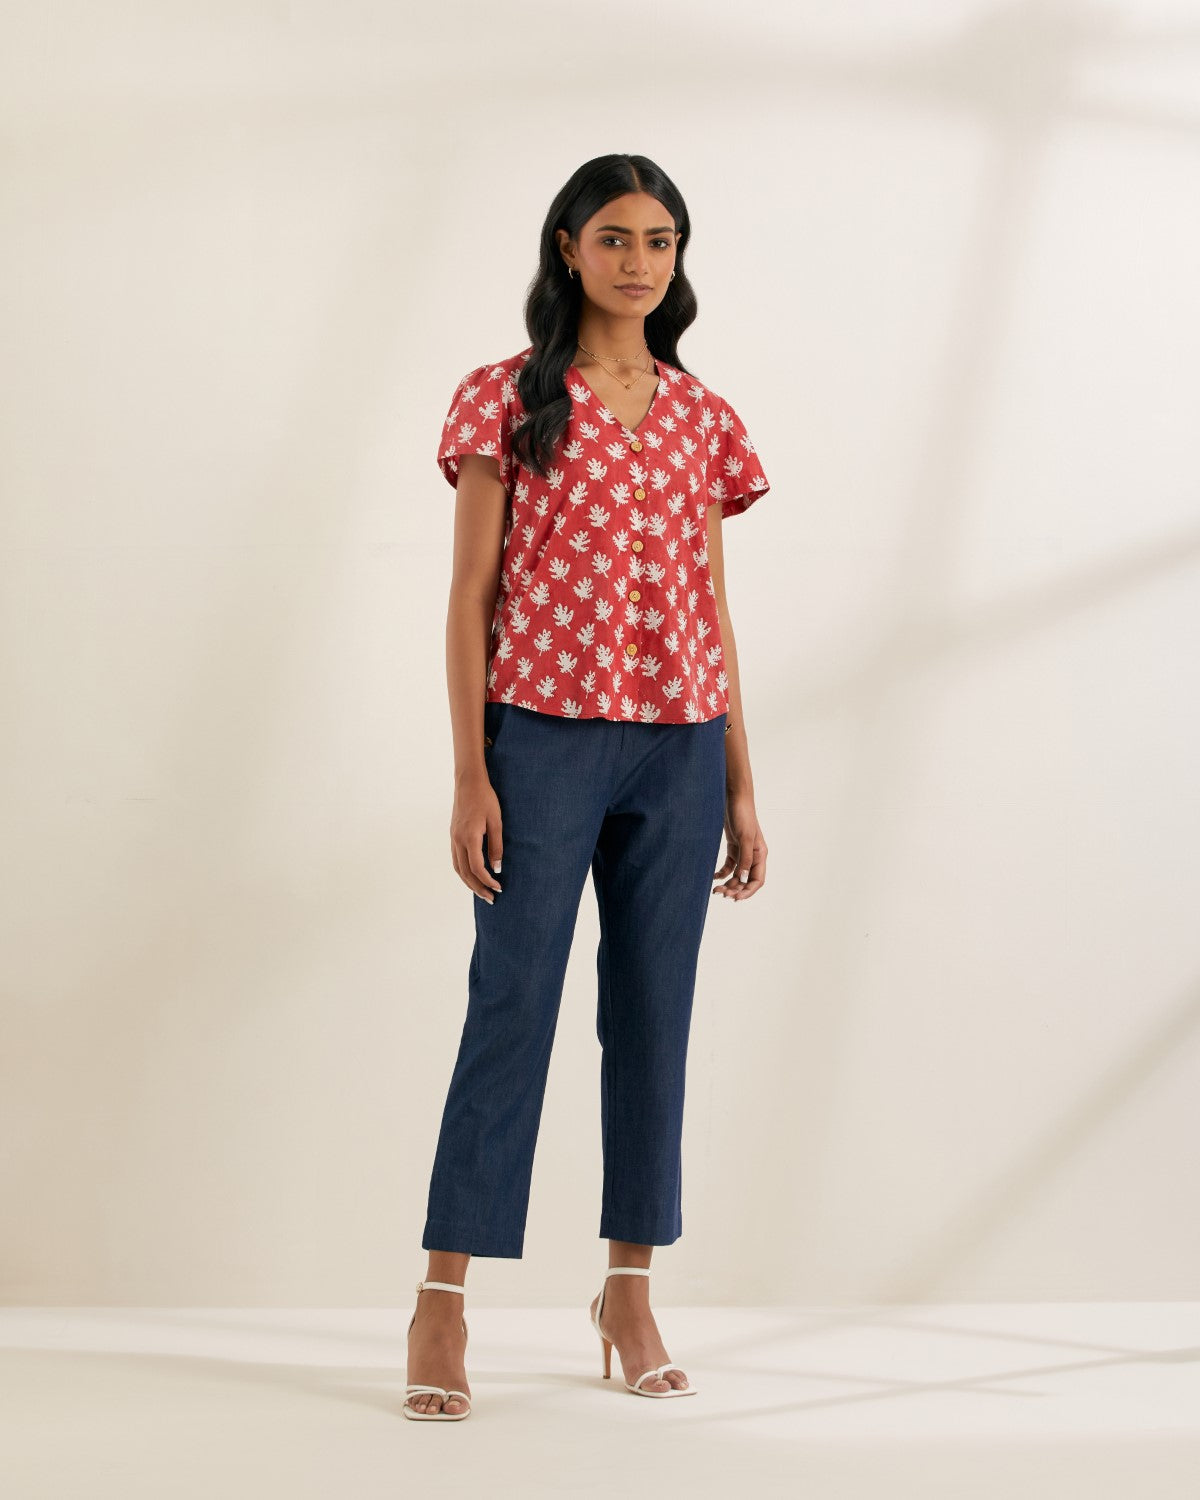 BERRY- Red button down top